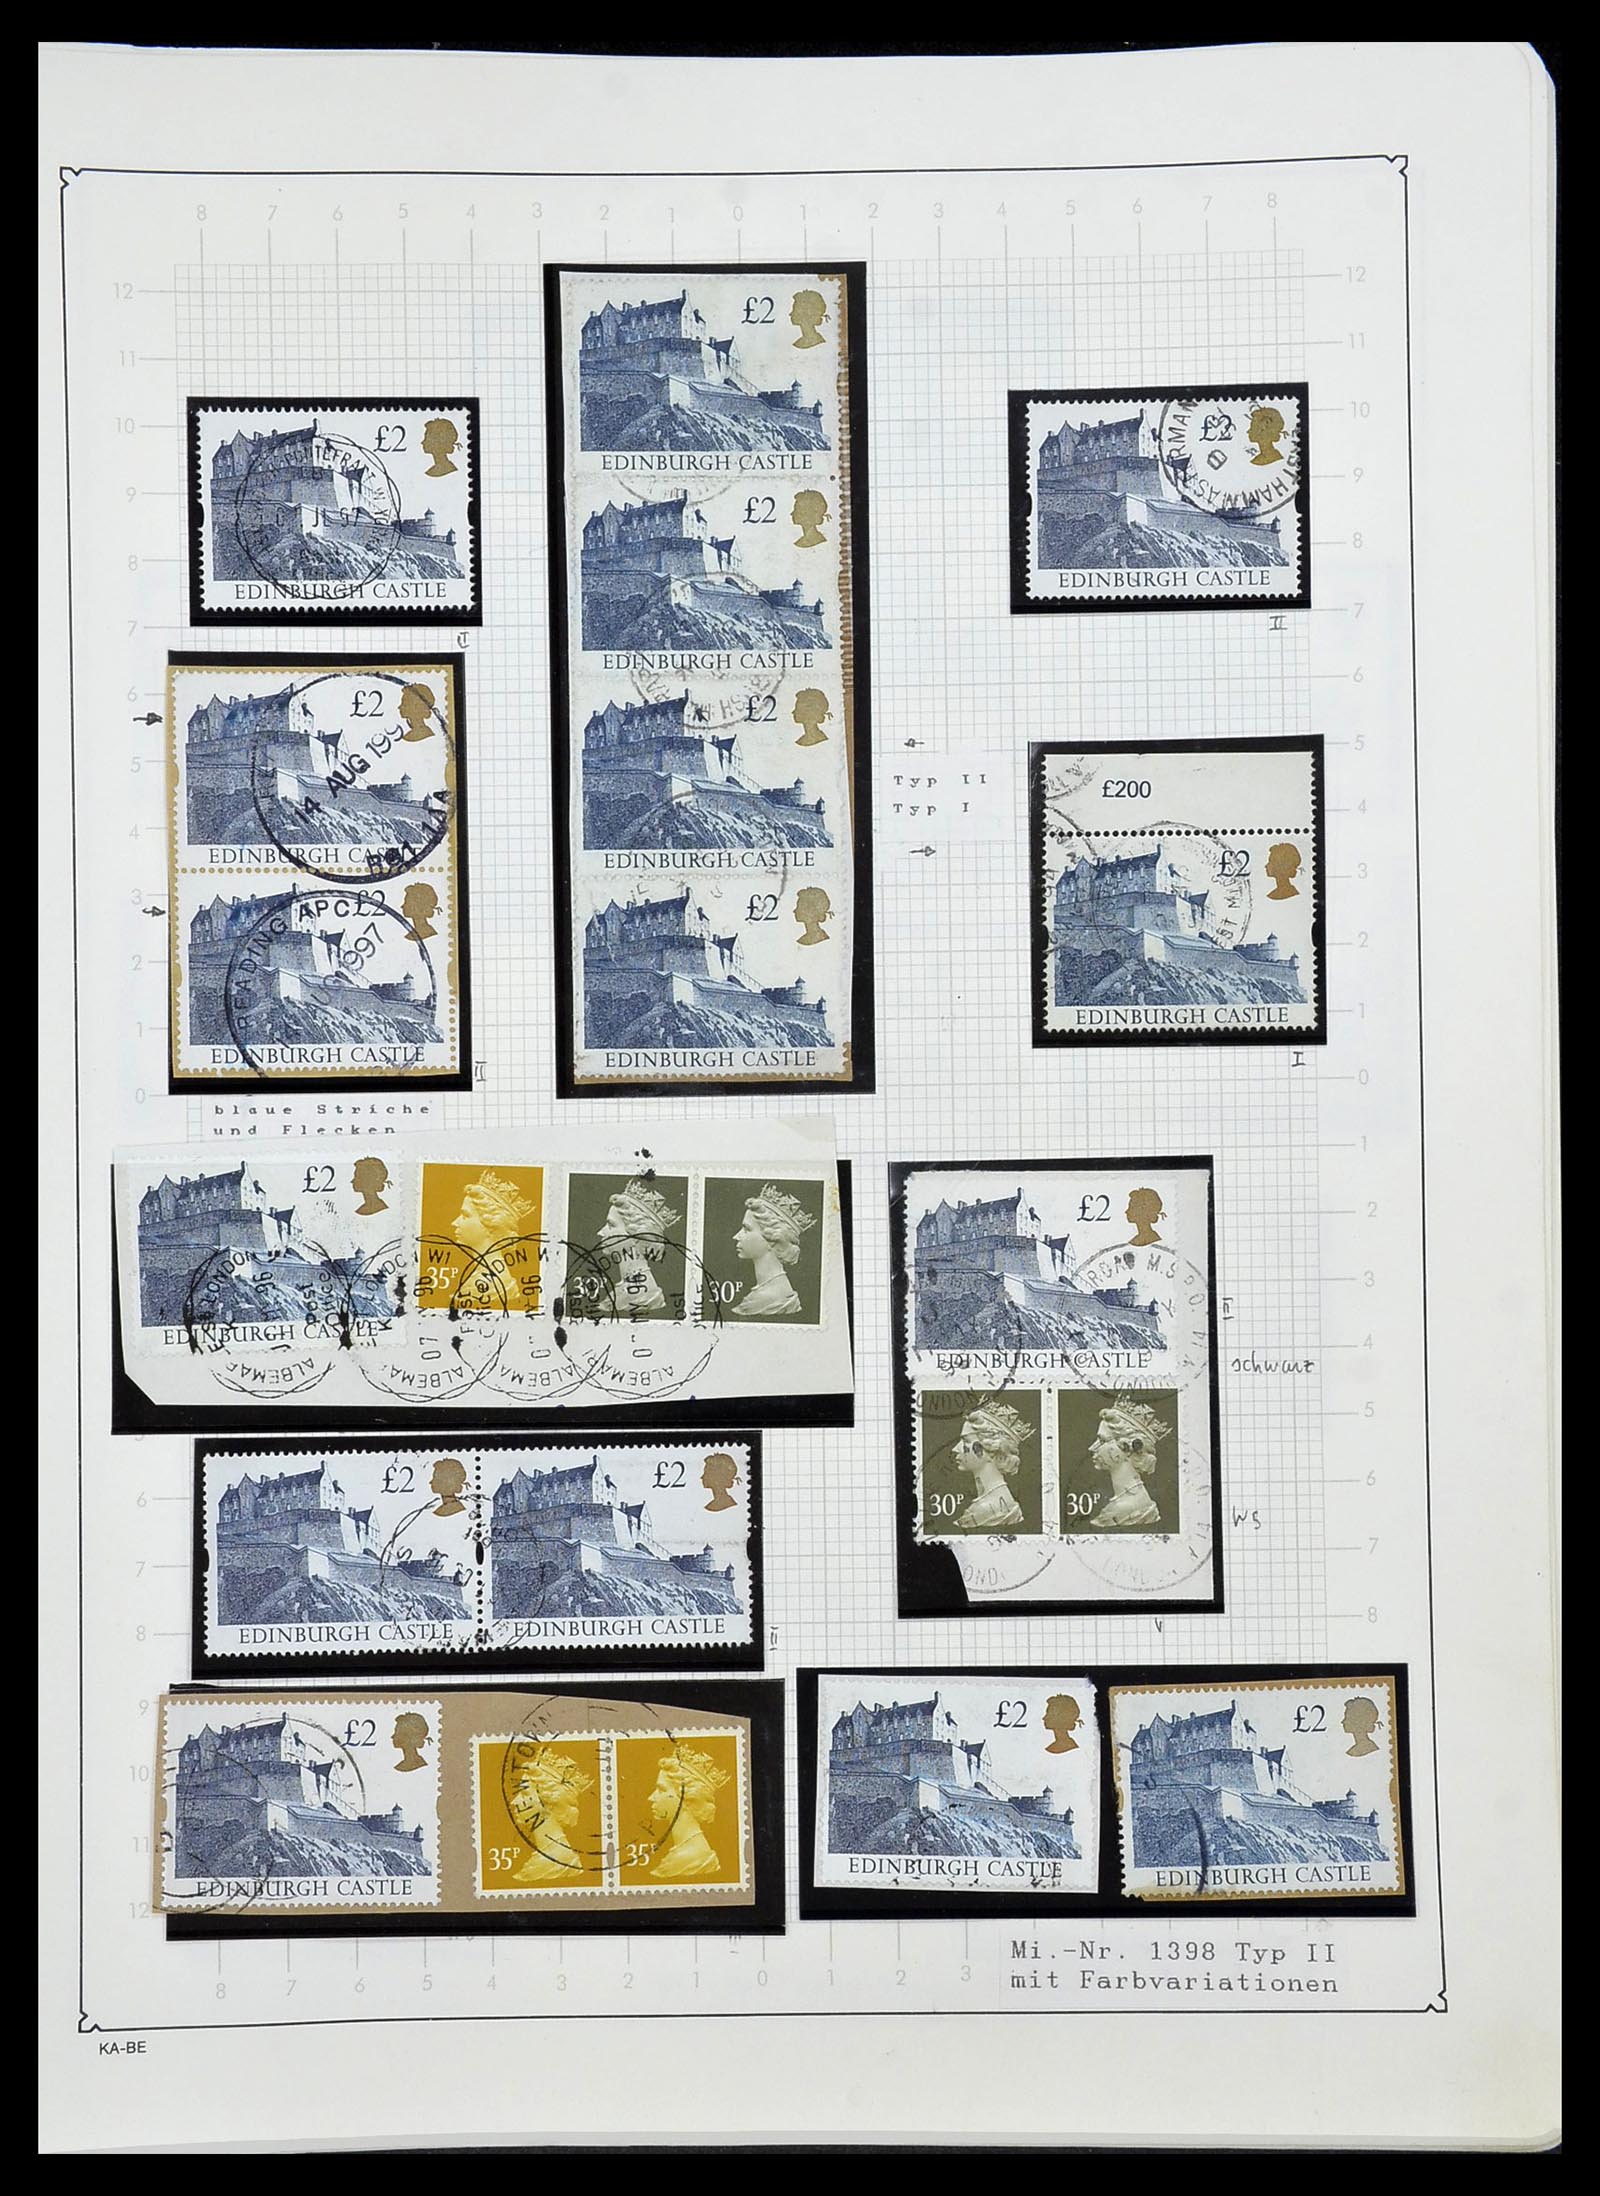 34221 169 - Stamp collection 34221 Great Britain Machins/castles 1971-2005.